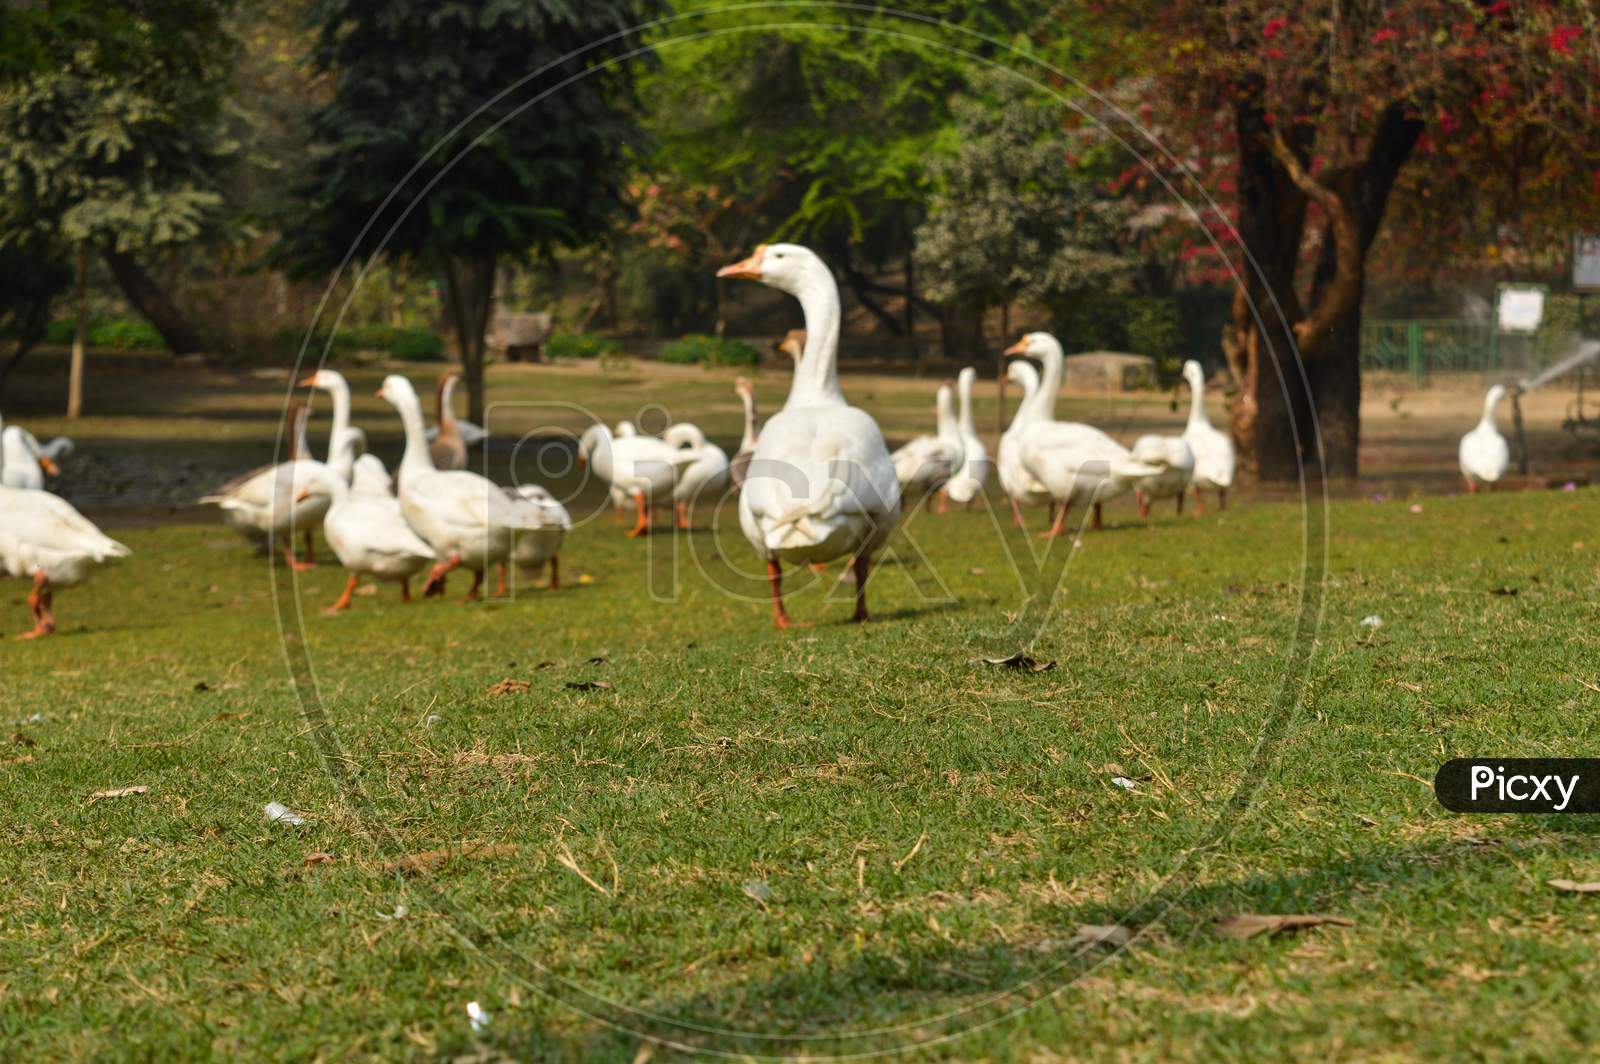 A Bunch Of White Color Duck Walking,Roaming Around At Garden, Lawn At Winter Foggy Morning.